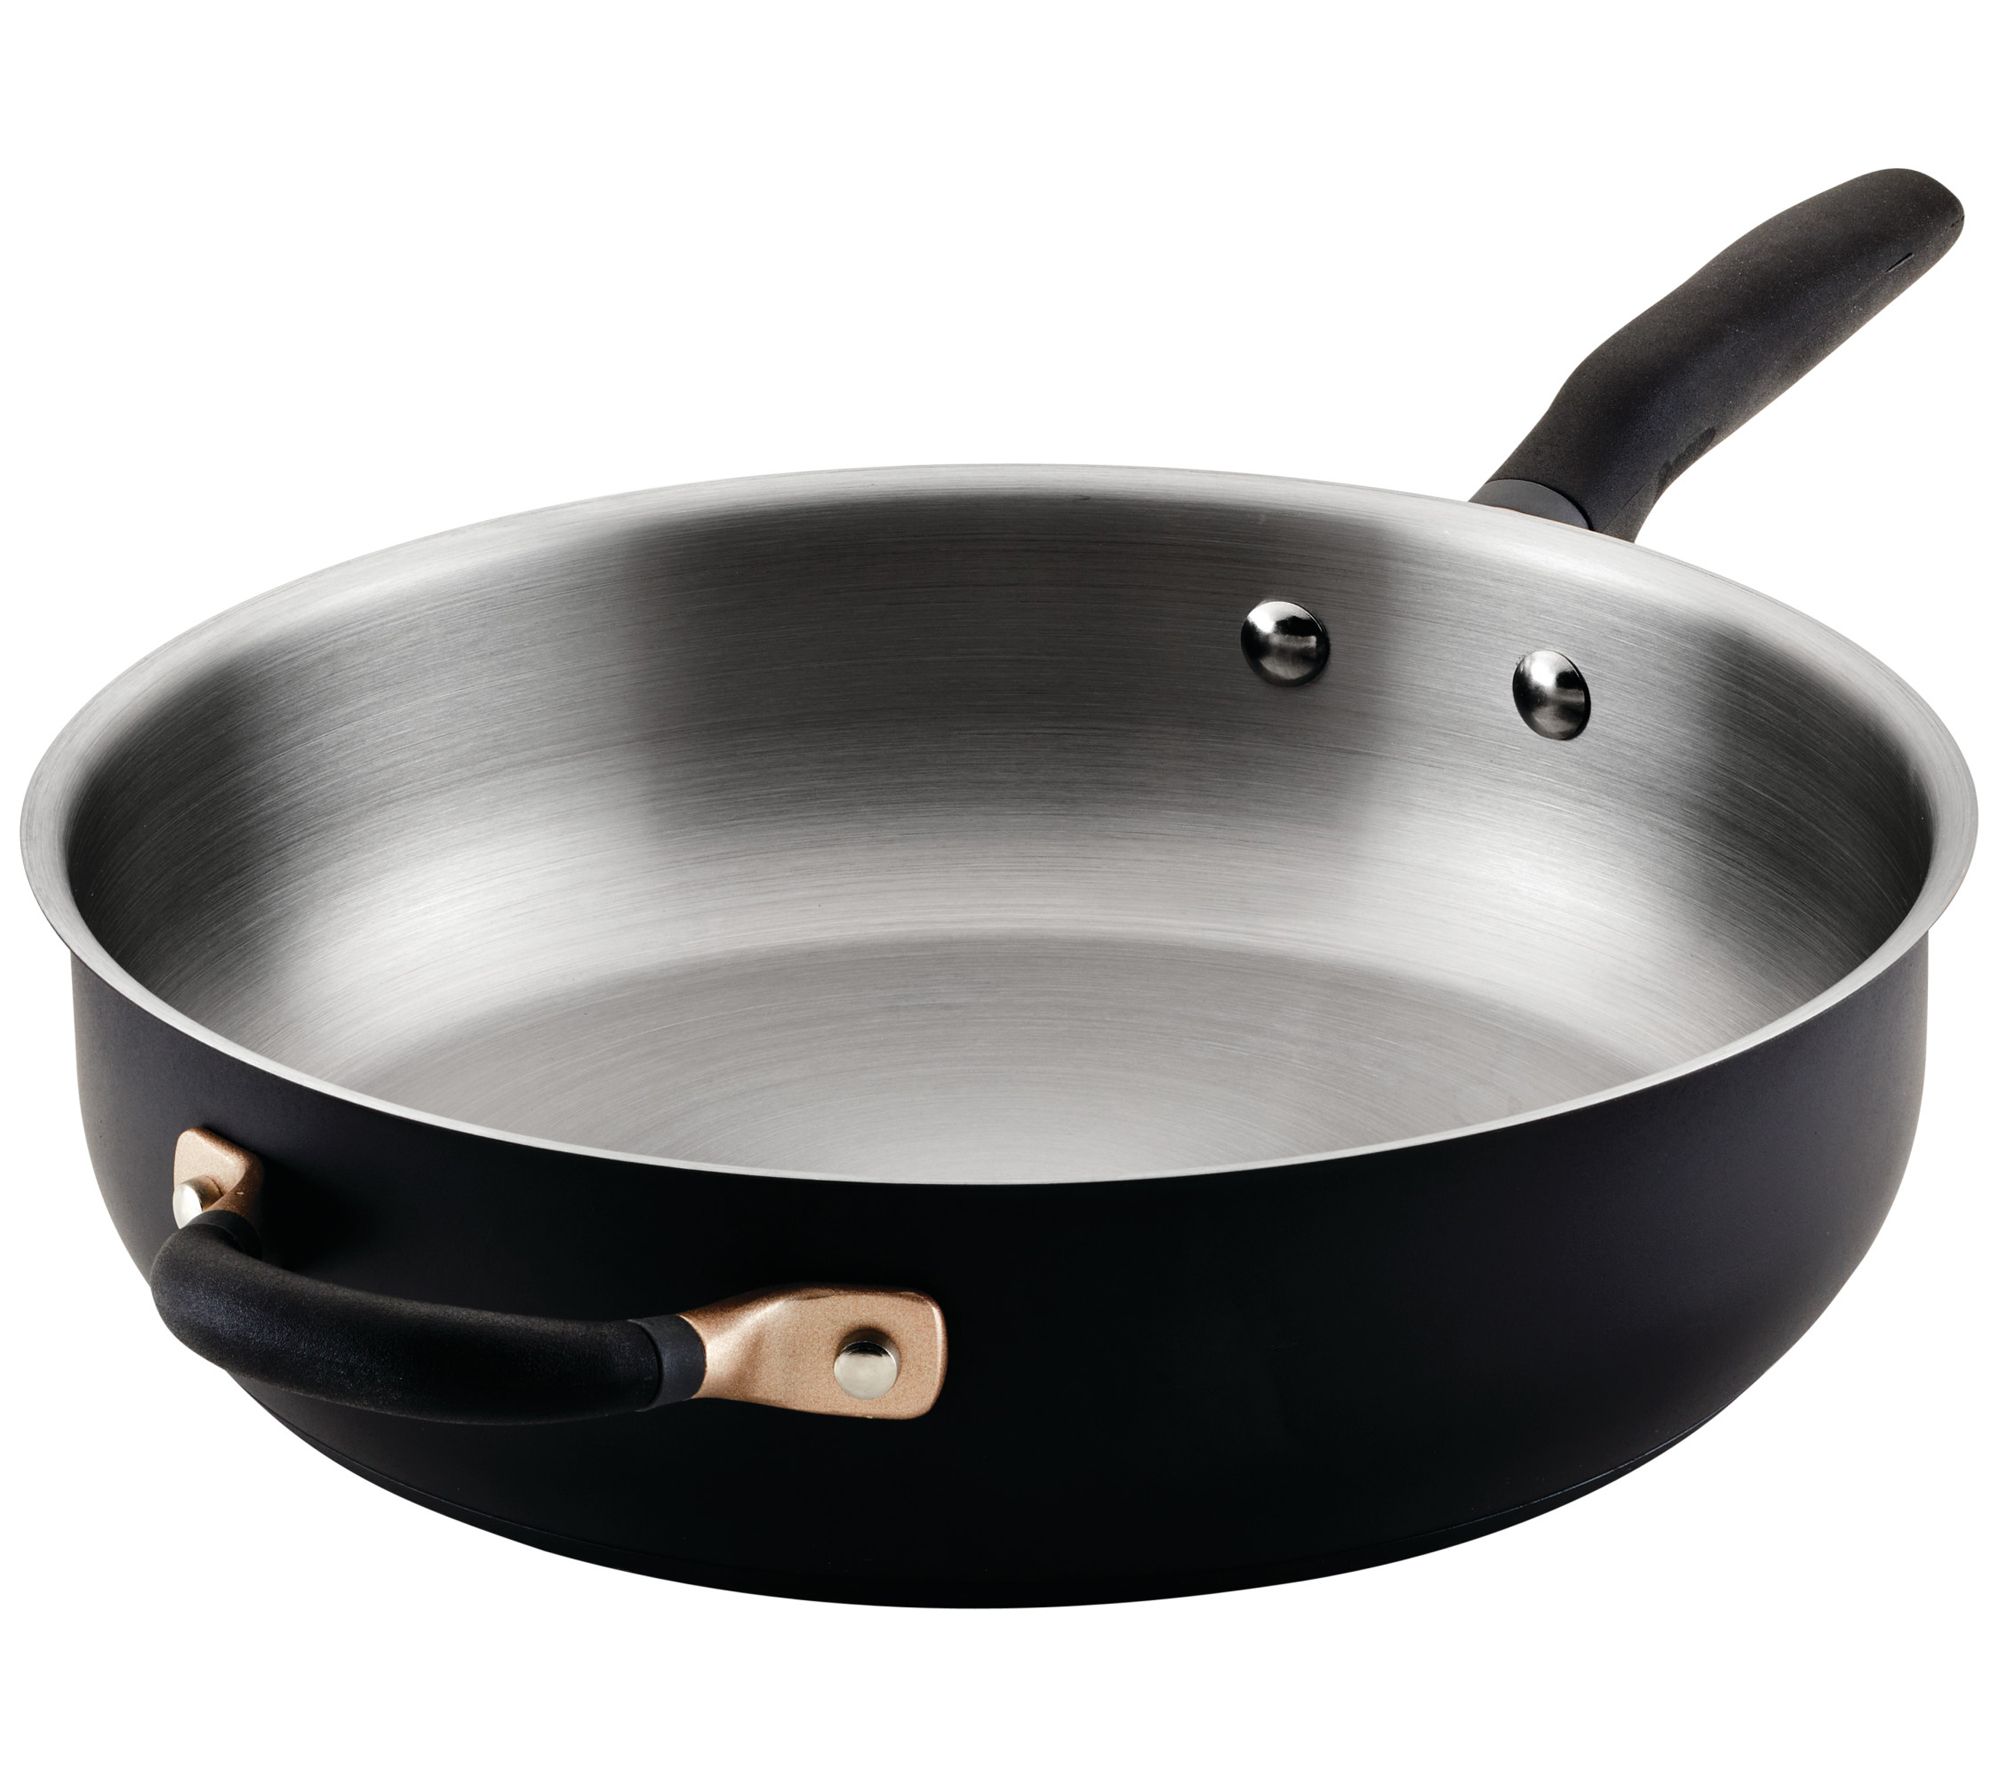 Rachael Ray Cook + Create 4.5 qt. Hard Anodized Aluminum Nonstick Saucier Sauce Pan in Black with Lid